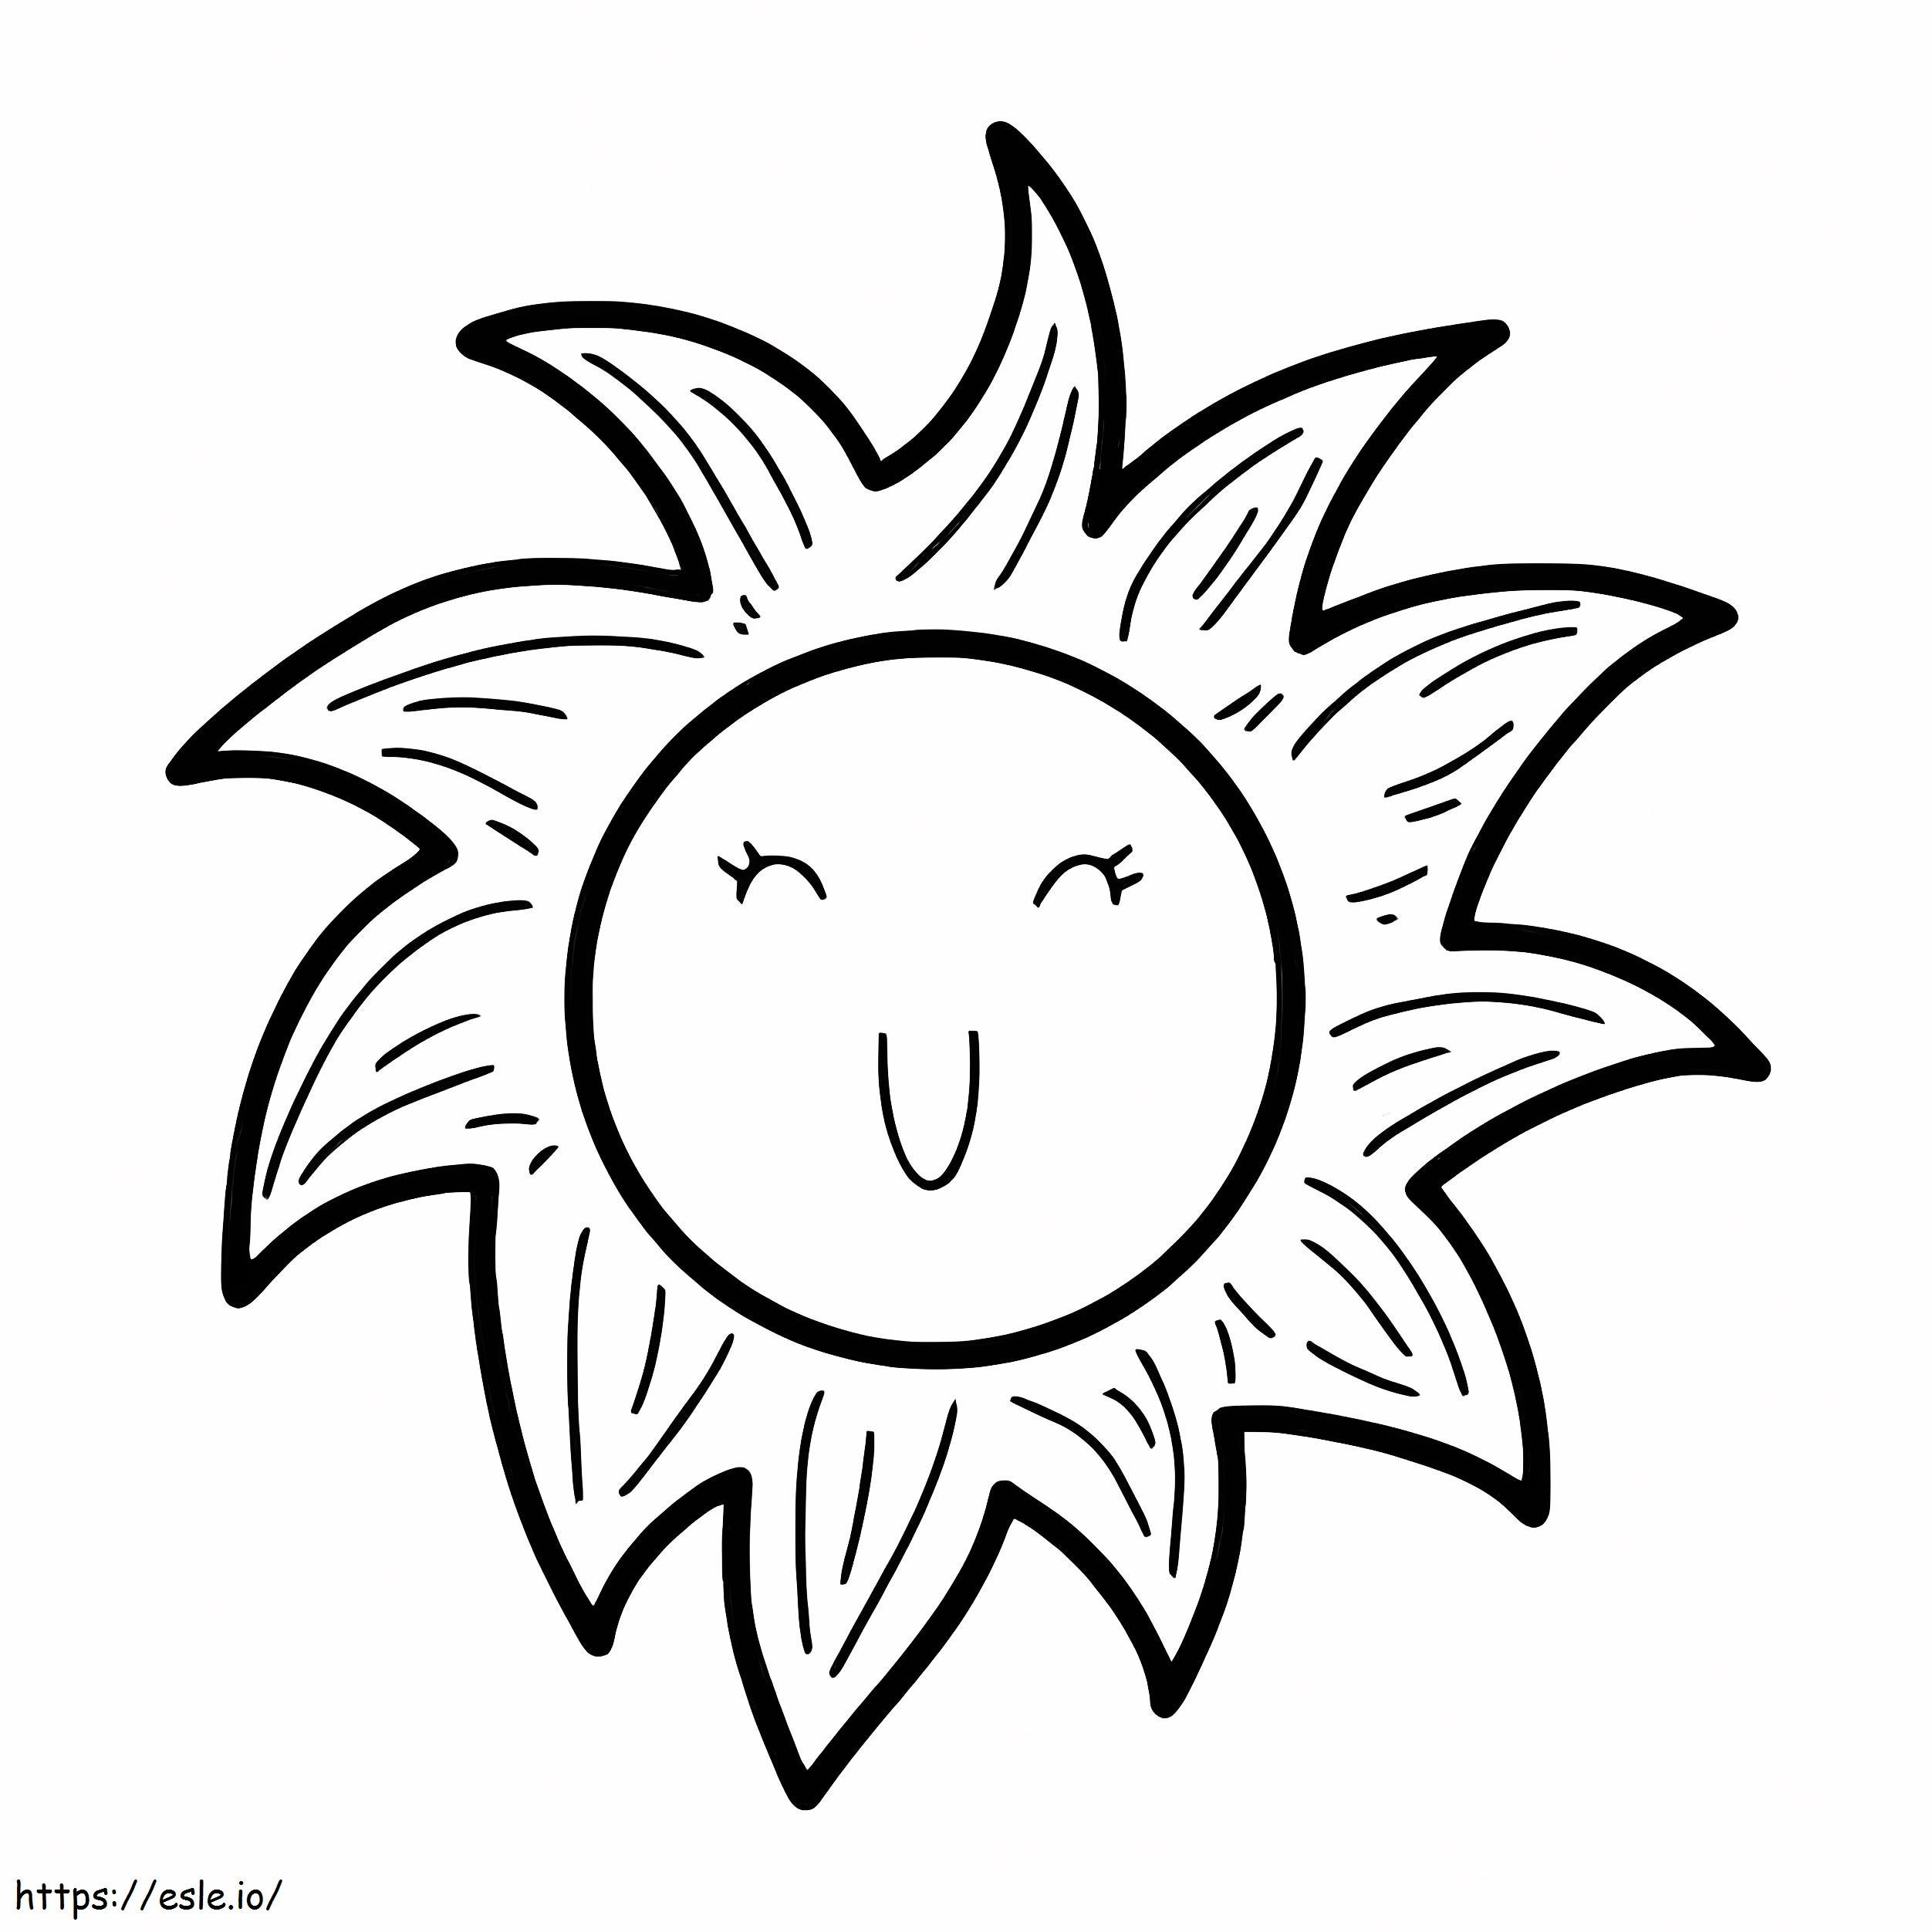 Smiling Sun Doodle coloring page